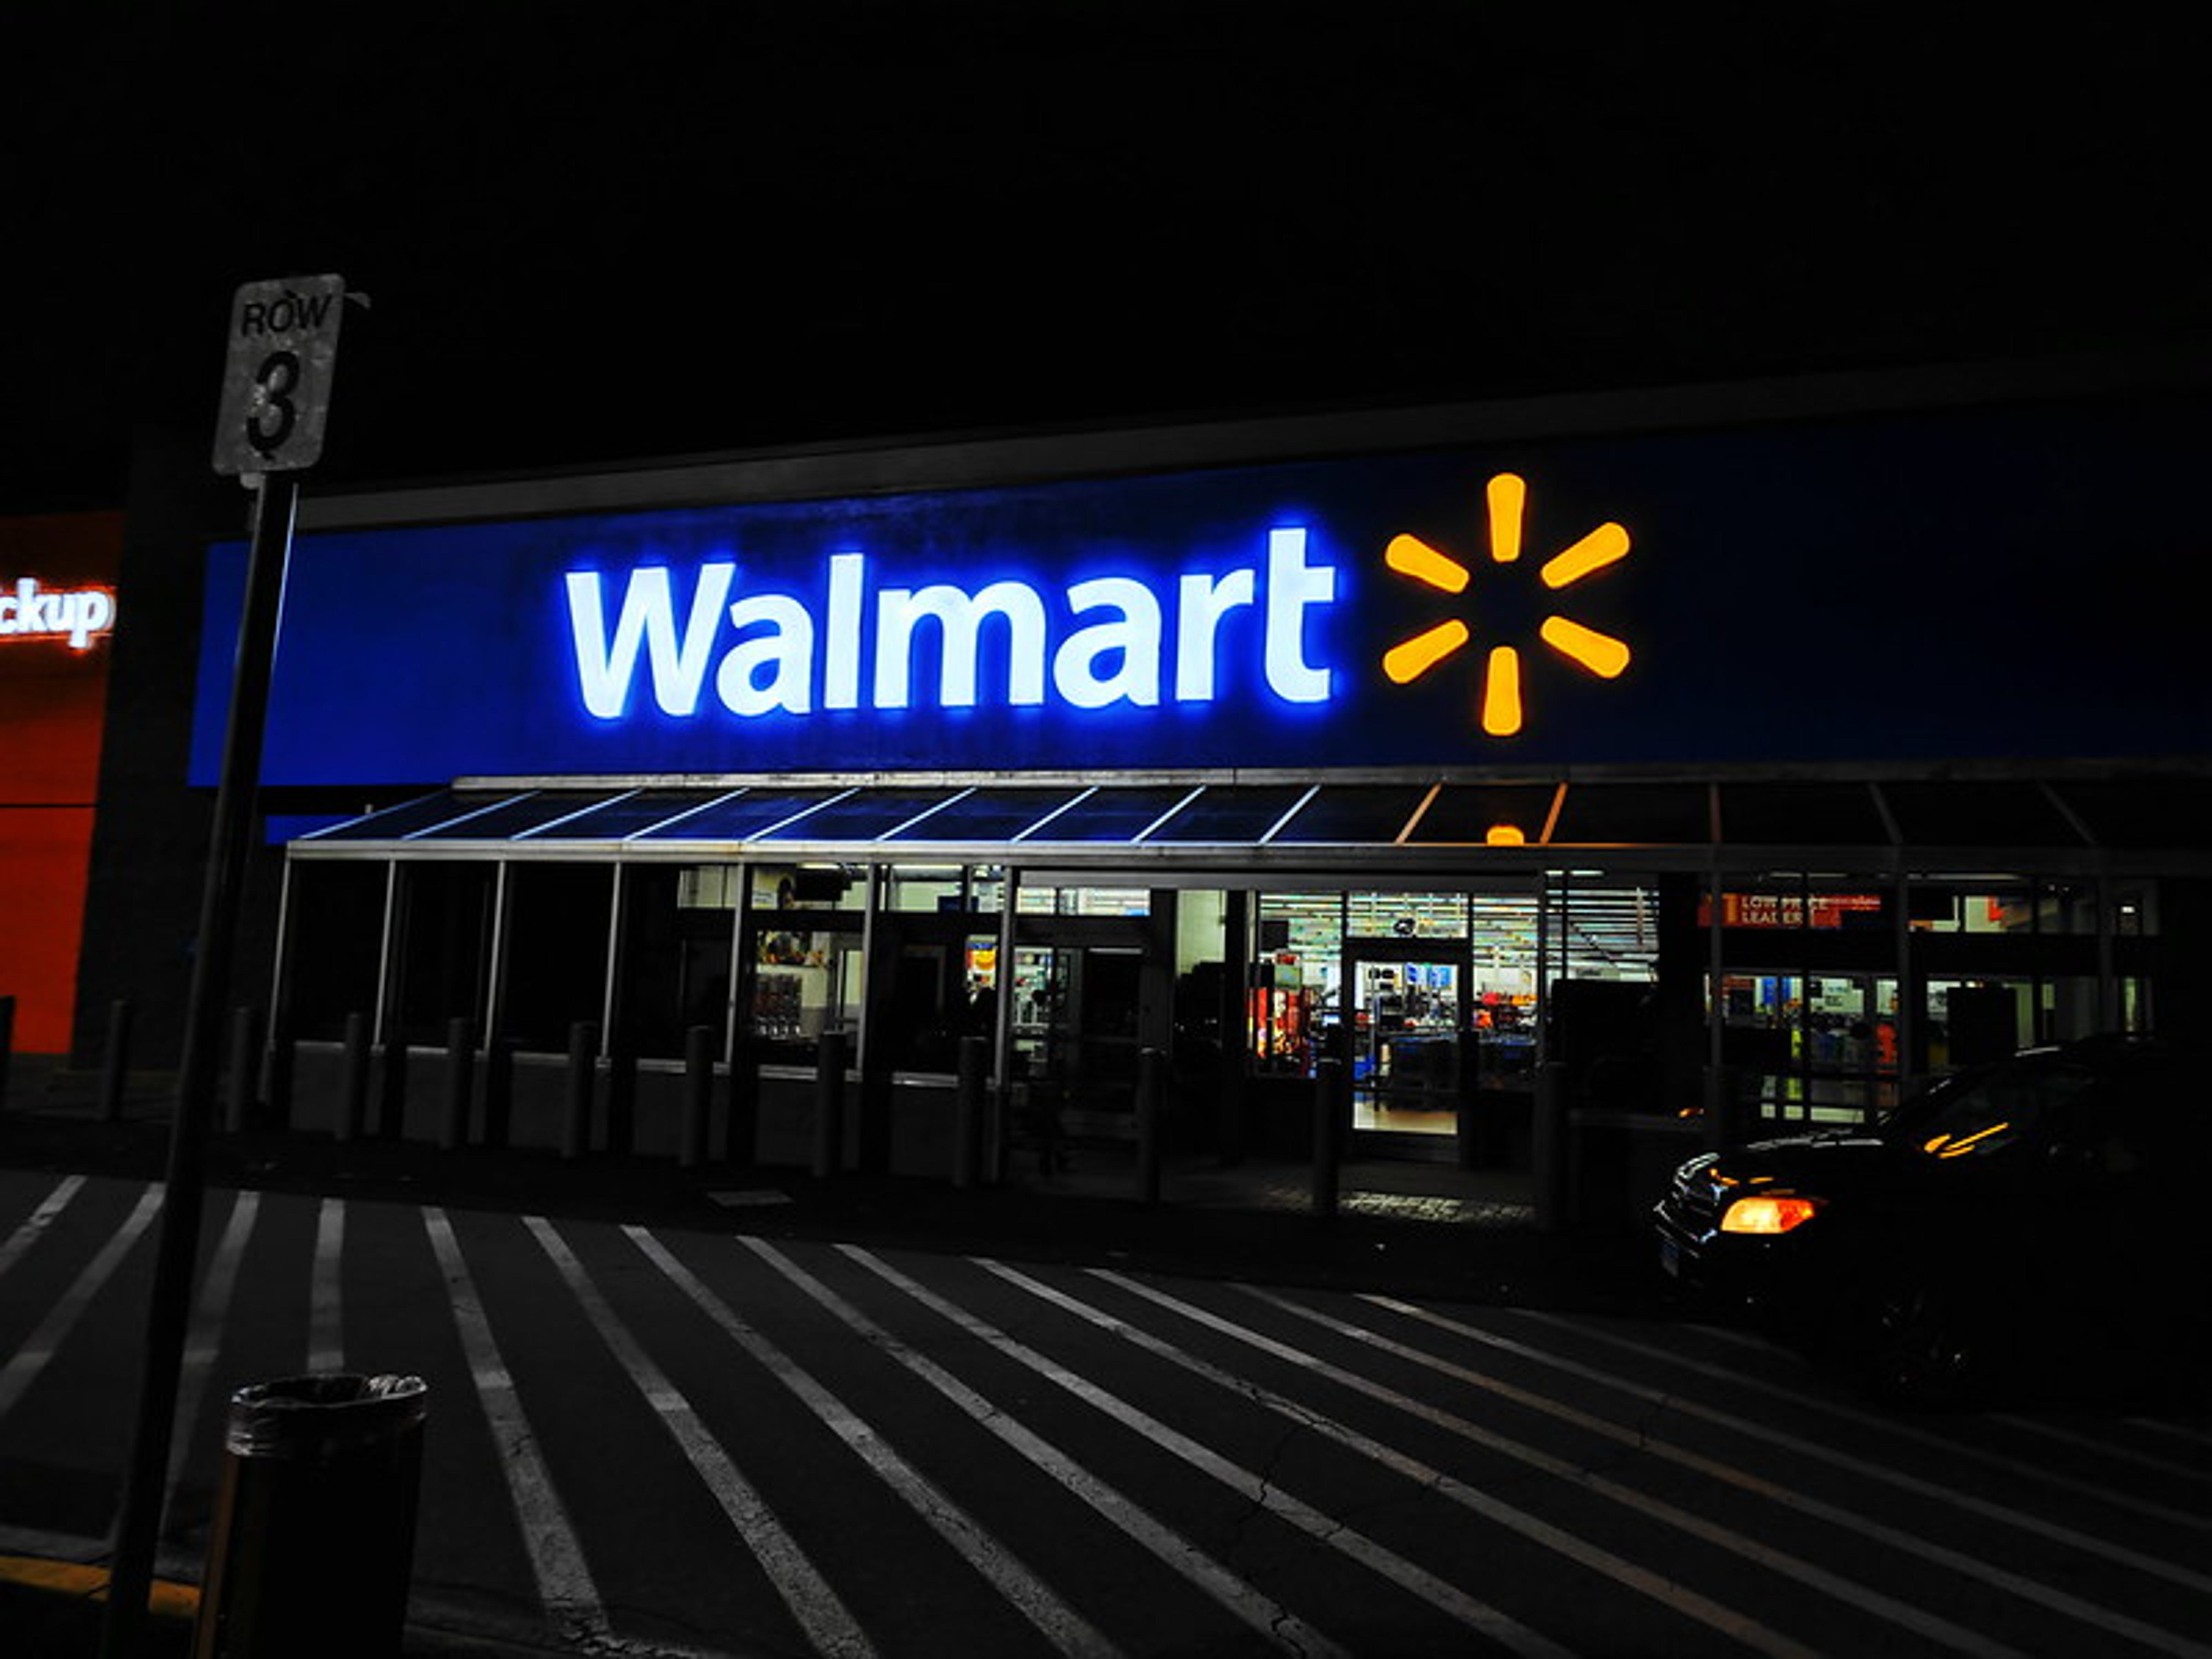 The Next Metaverse Stock Could Be...Walmart?